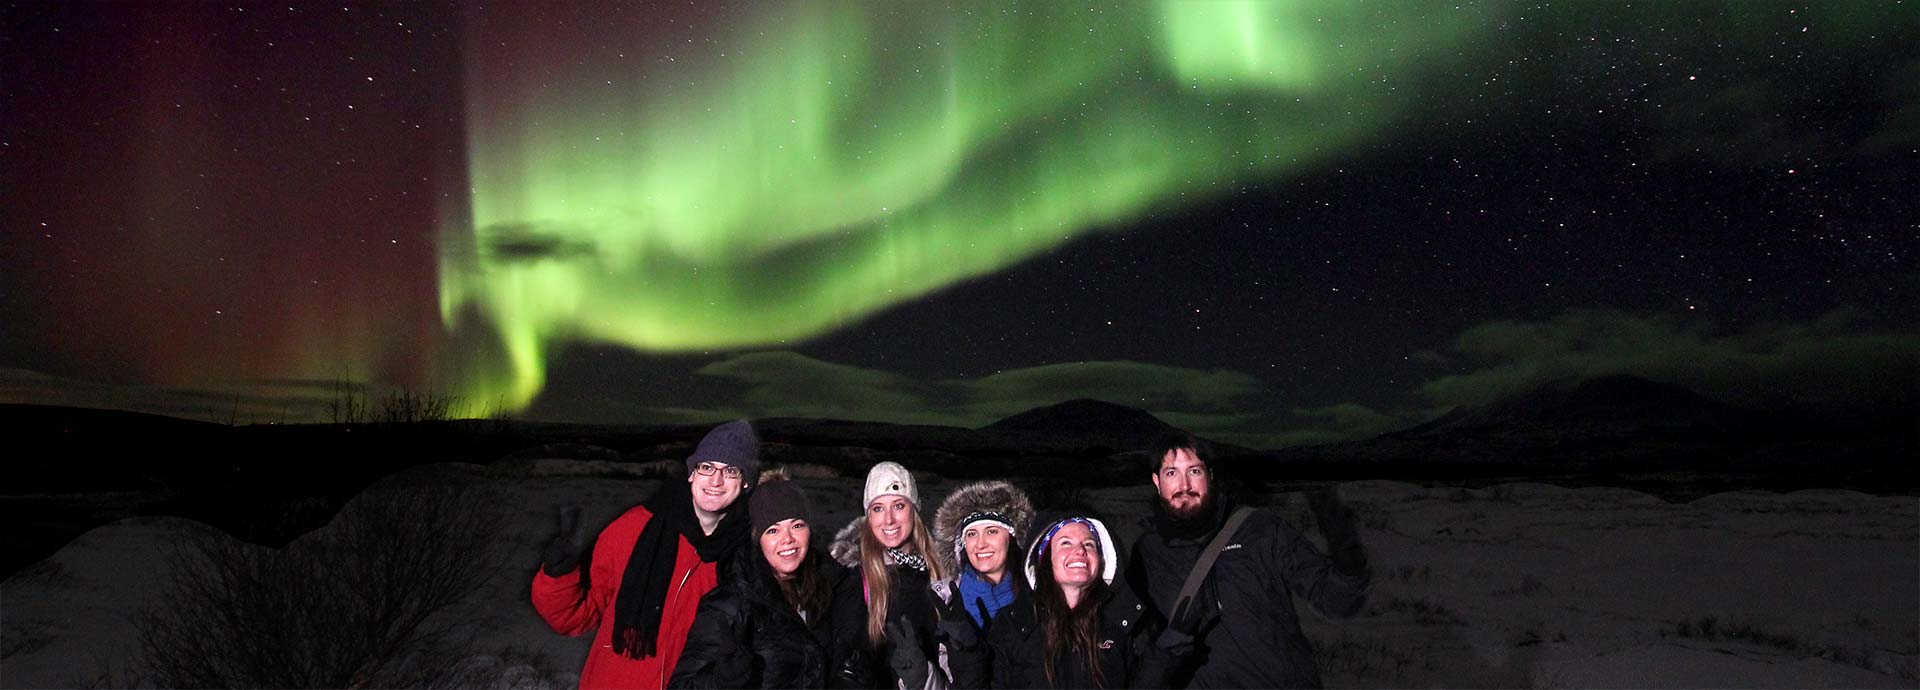 Northern Lights Experience Small Group Tour Happyworld Iceland